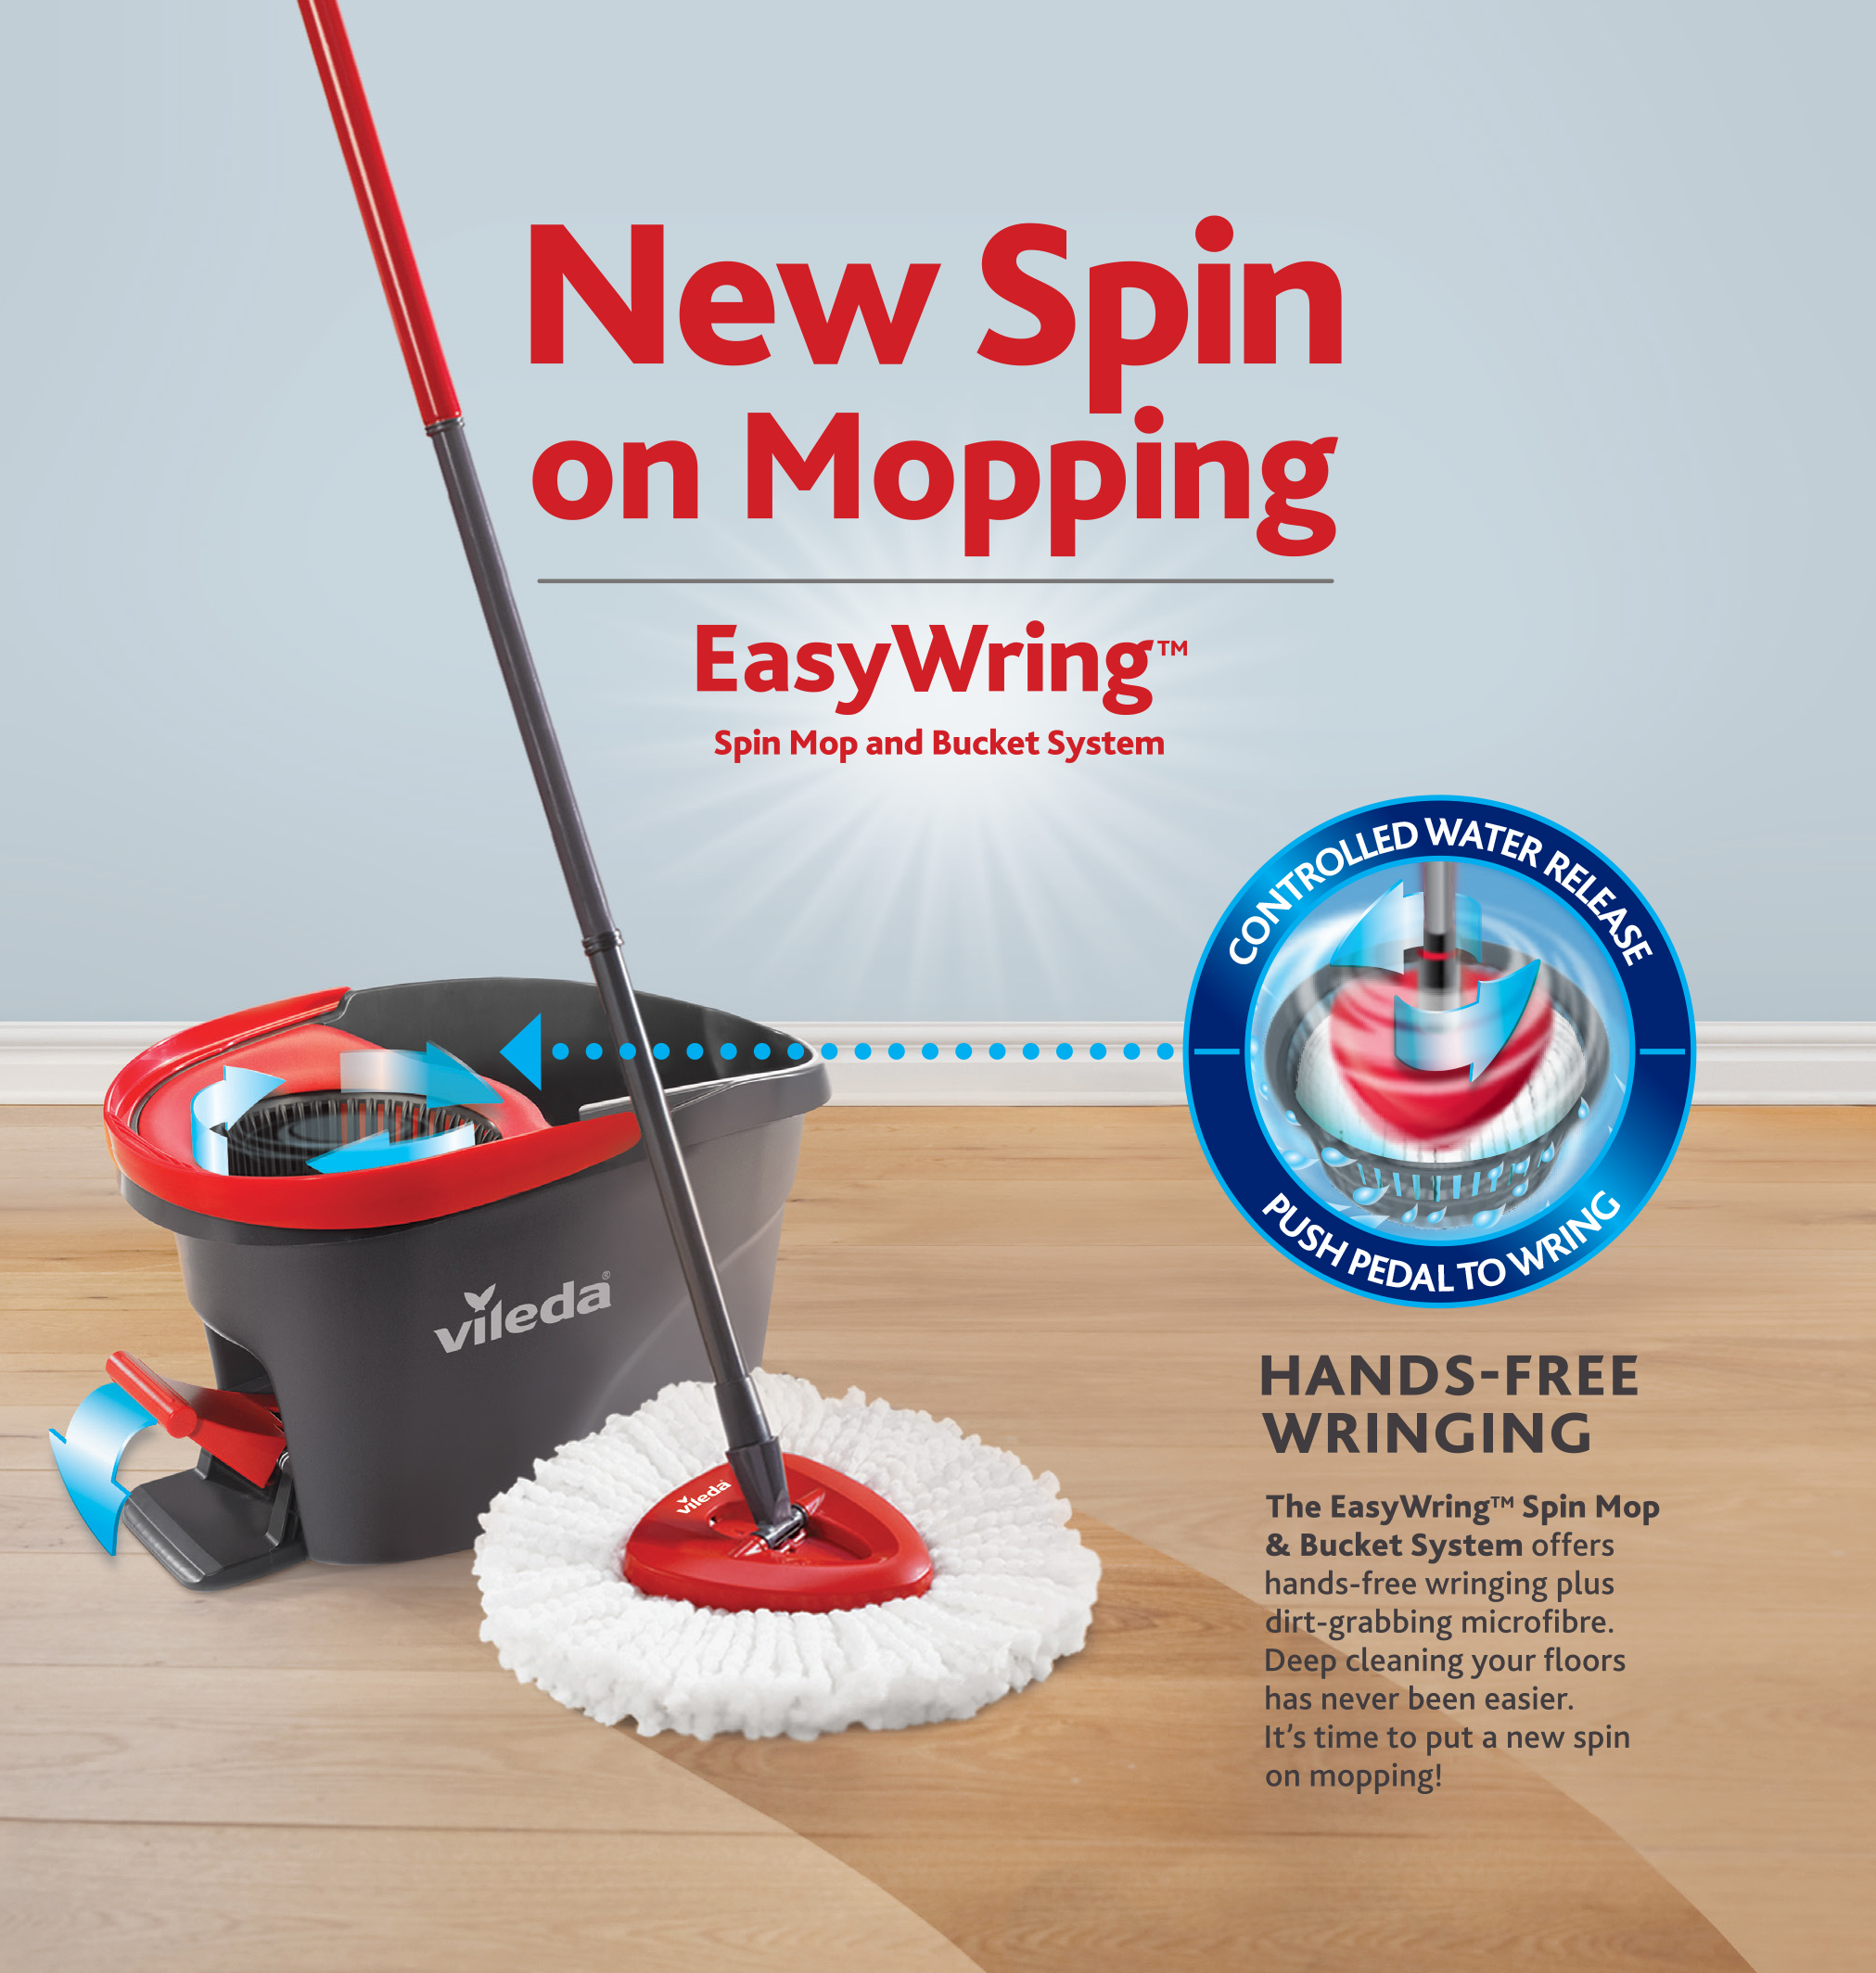 Vileda Turbo Spin Mop - the floor can't get cleaner 